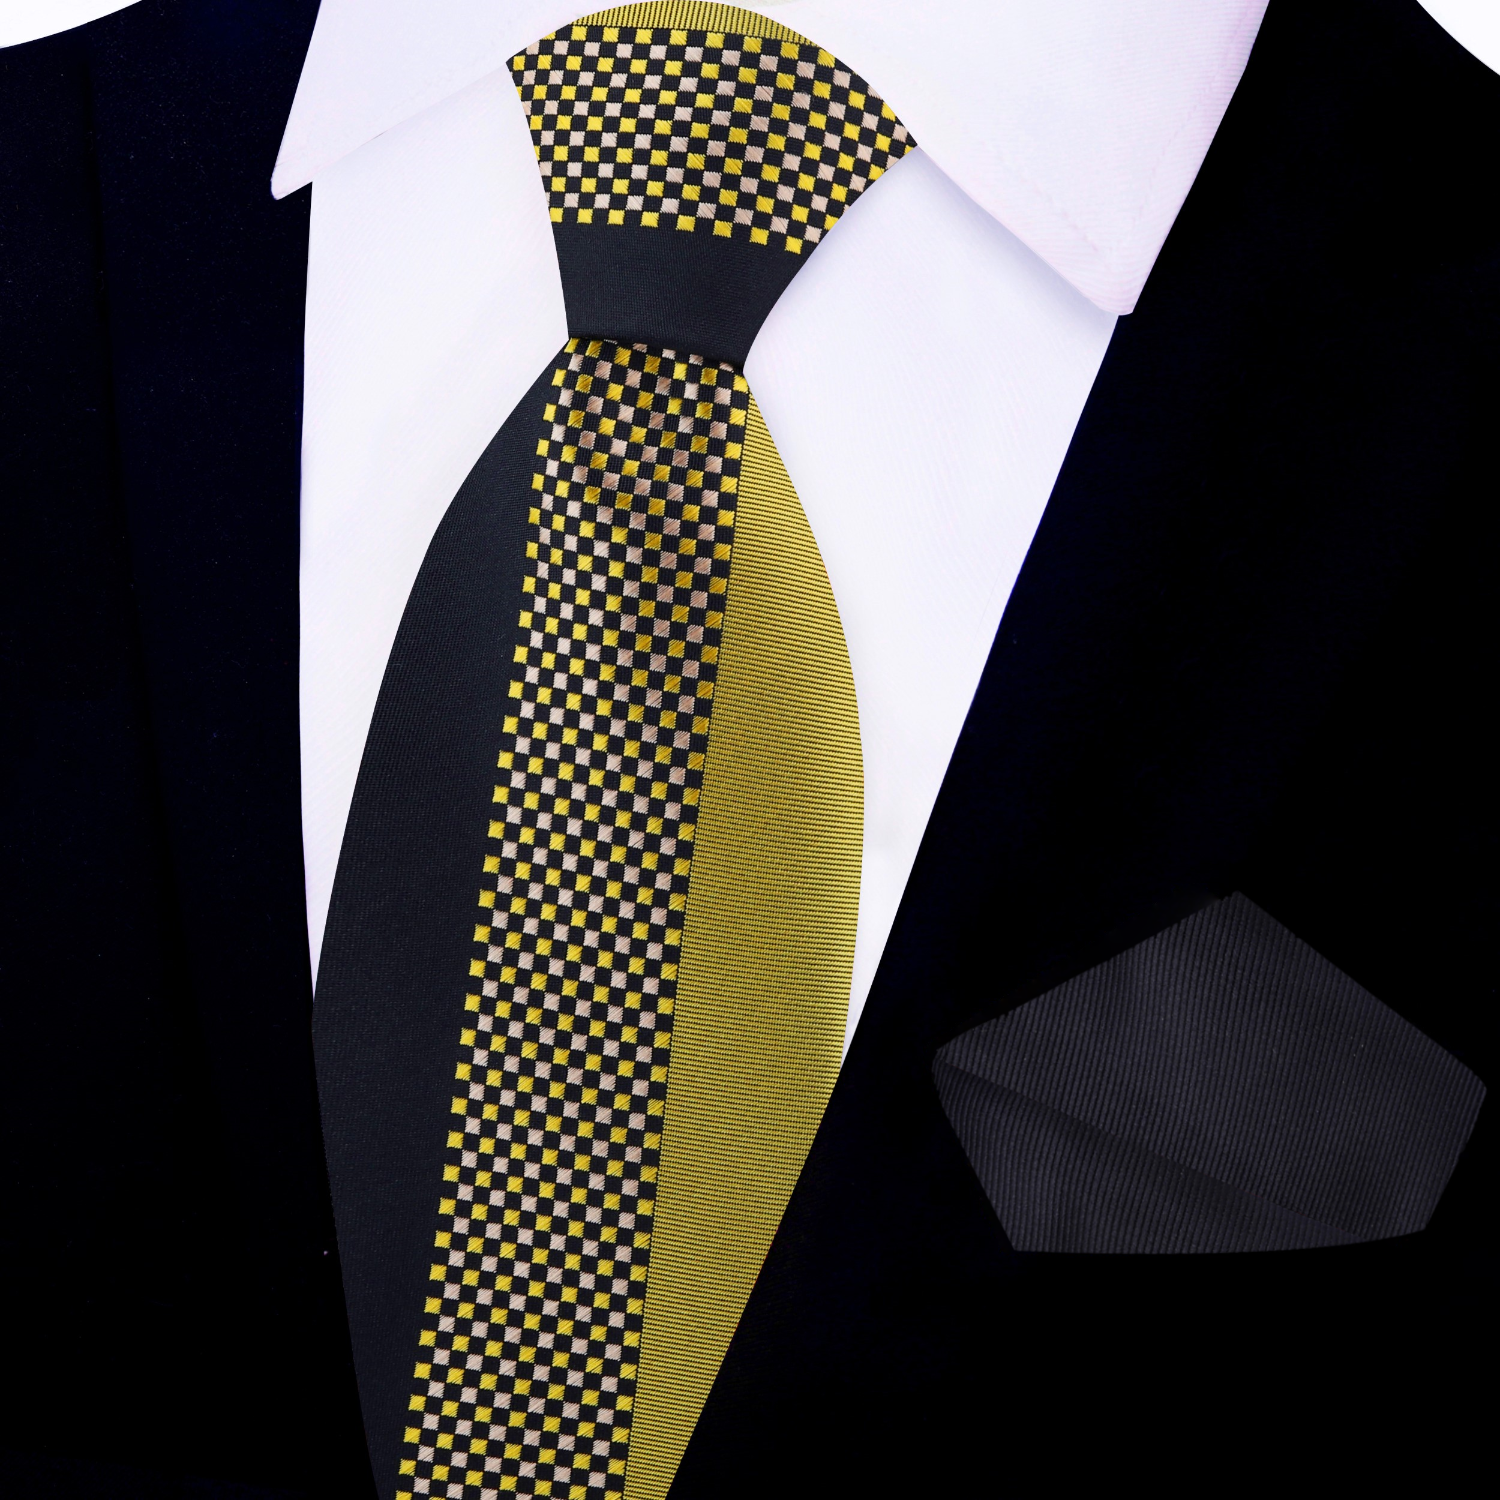 View 2: Gold and Black Small Check Necktie and Black Square